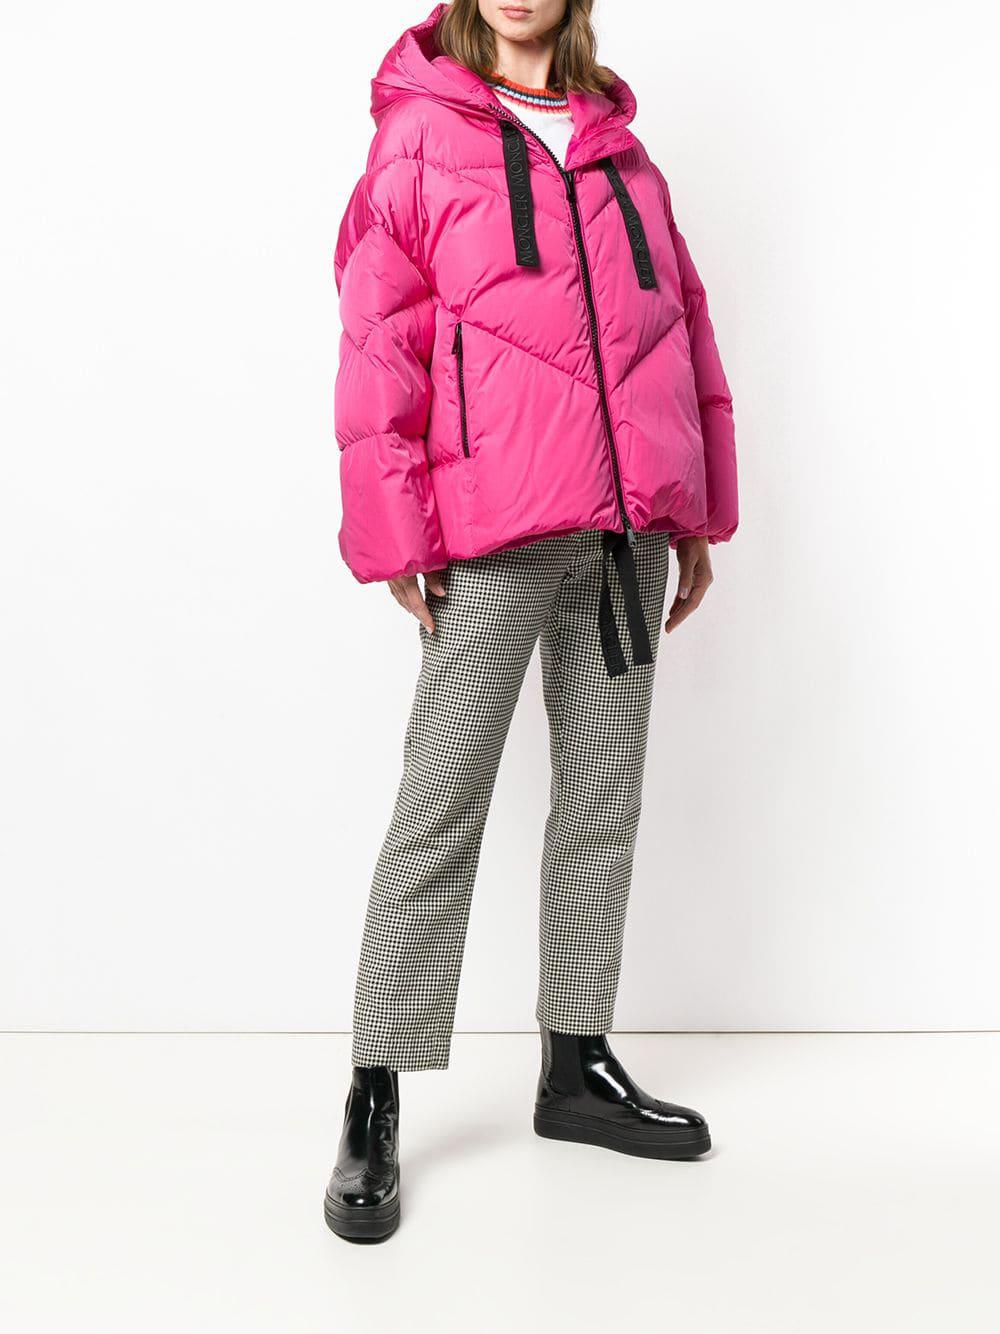 Moncler Synthetic Ibise Puffer Jacket in Pink - Lyst